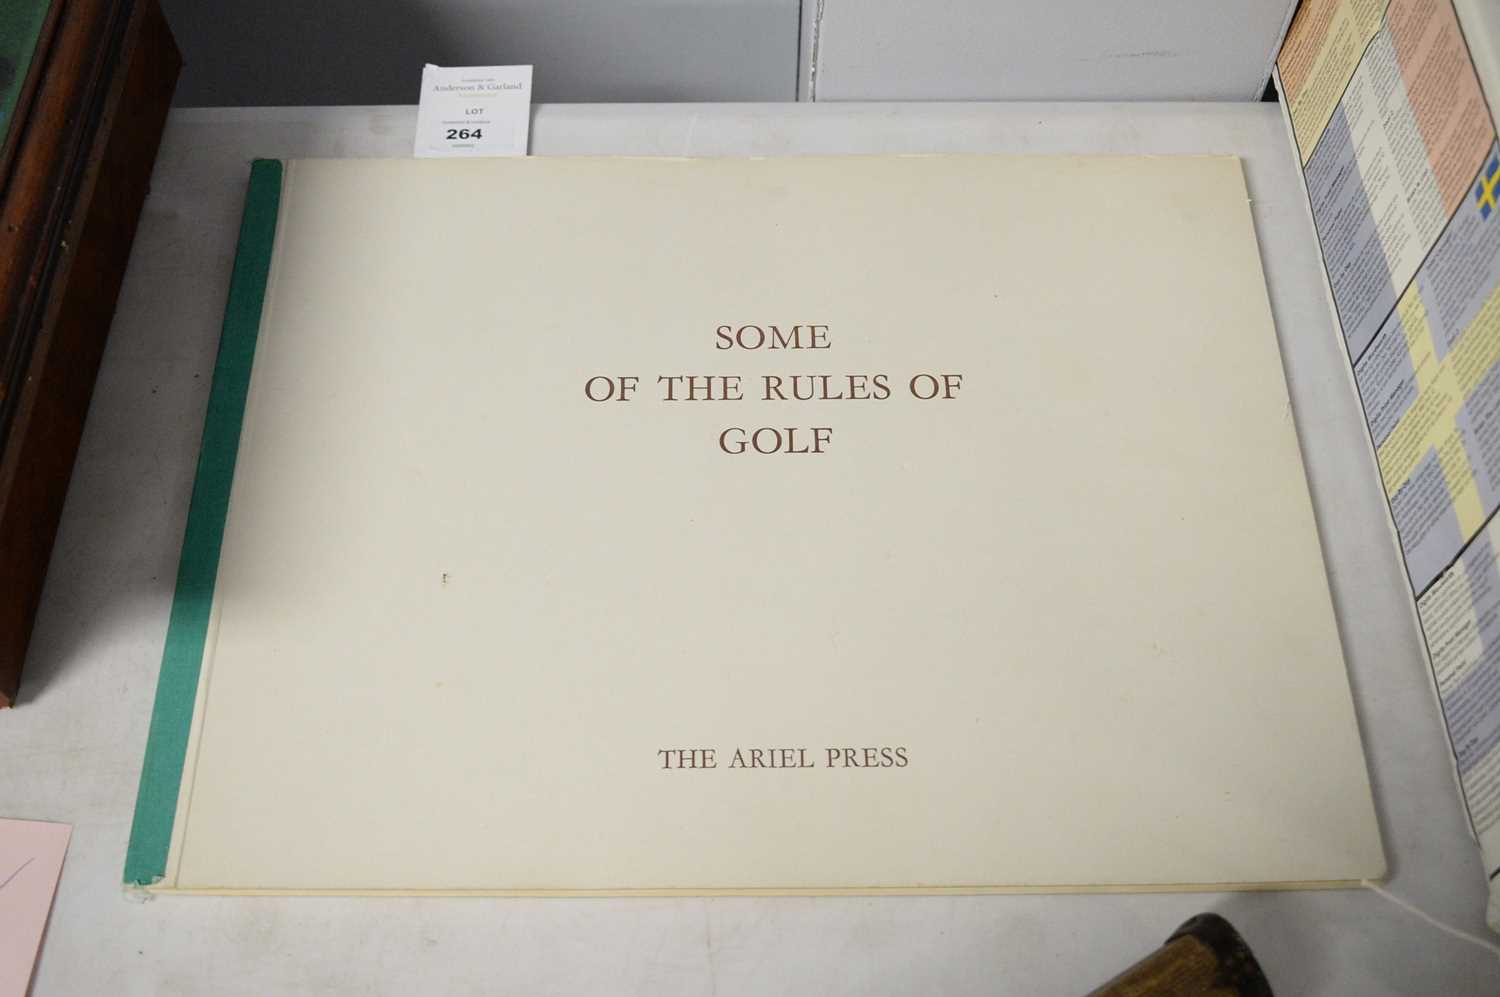 Book: Crombie (Charles) "Some of The Rules of Golf".